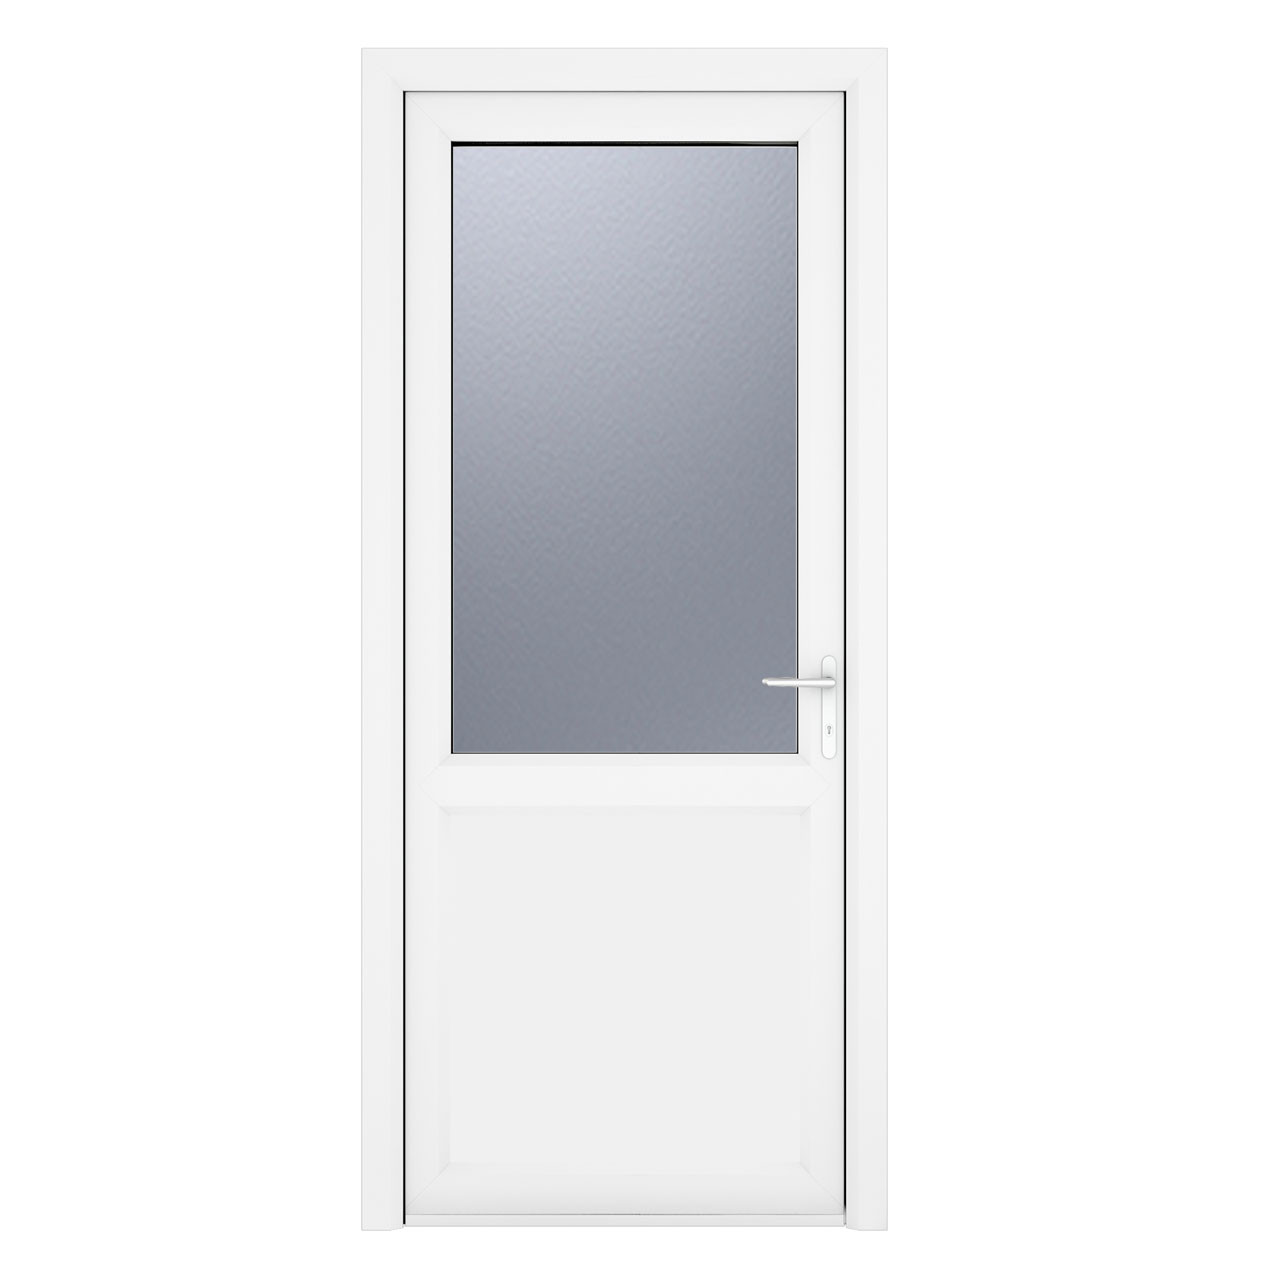 Photograph of Crystal White uPVC Back Door Half Glazed Frosted Glass Left Hand Hung 2090mm x 920mm